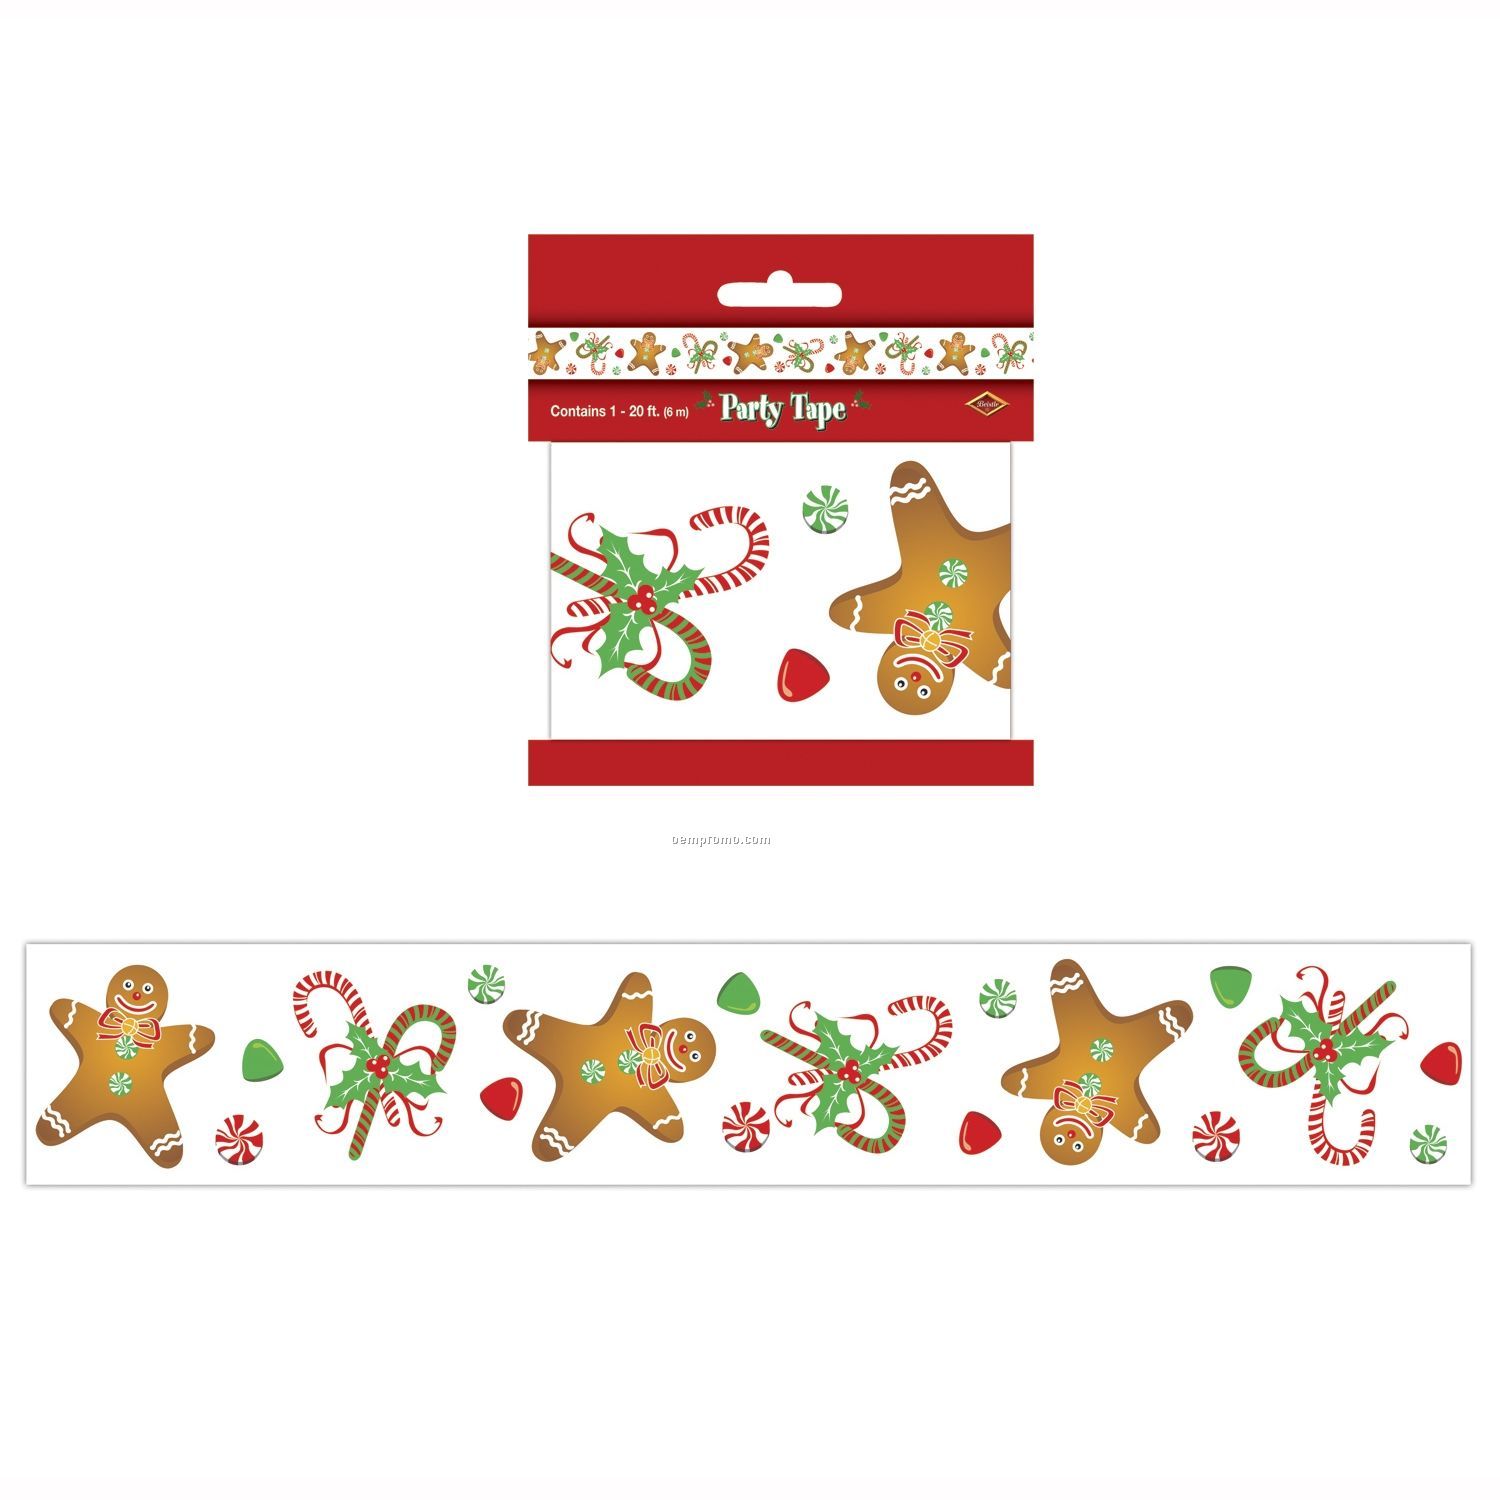 Gingerbread Man Party Tape